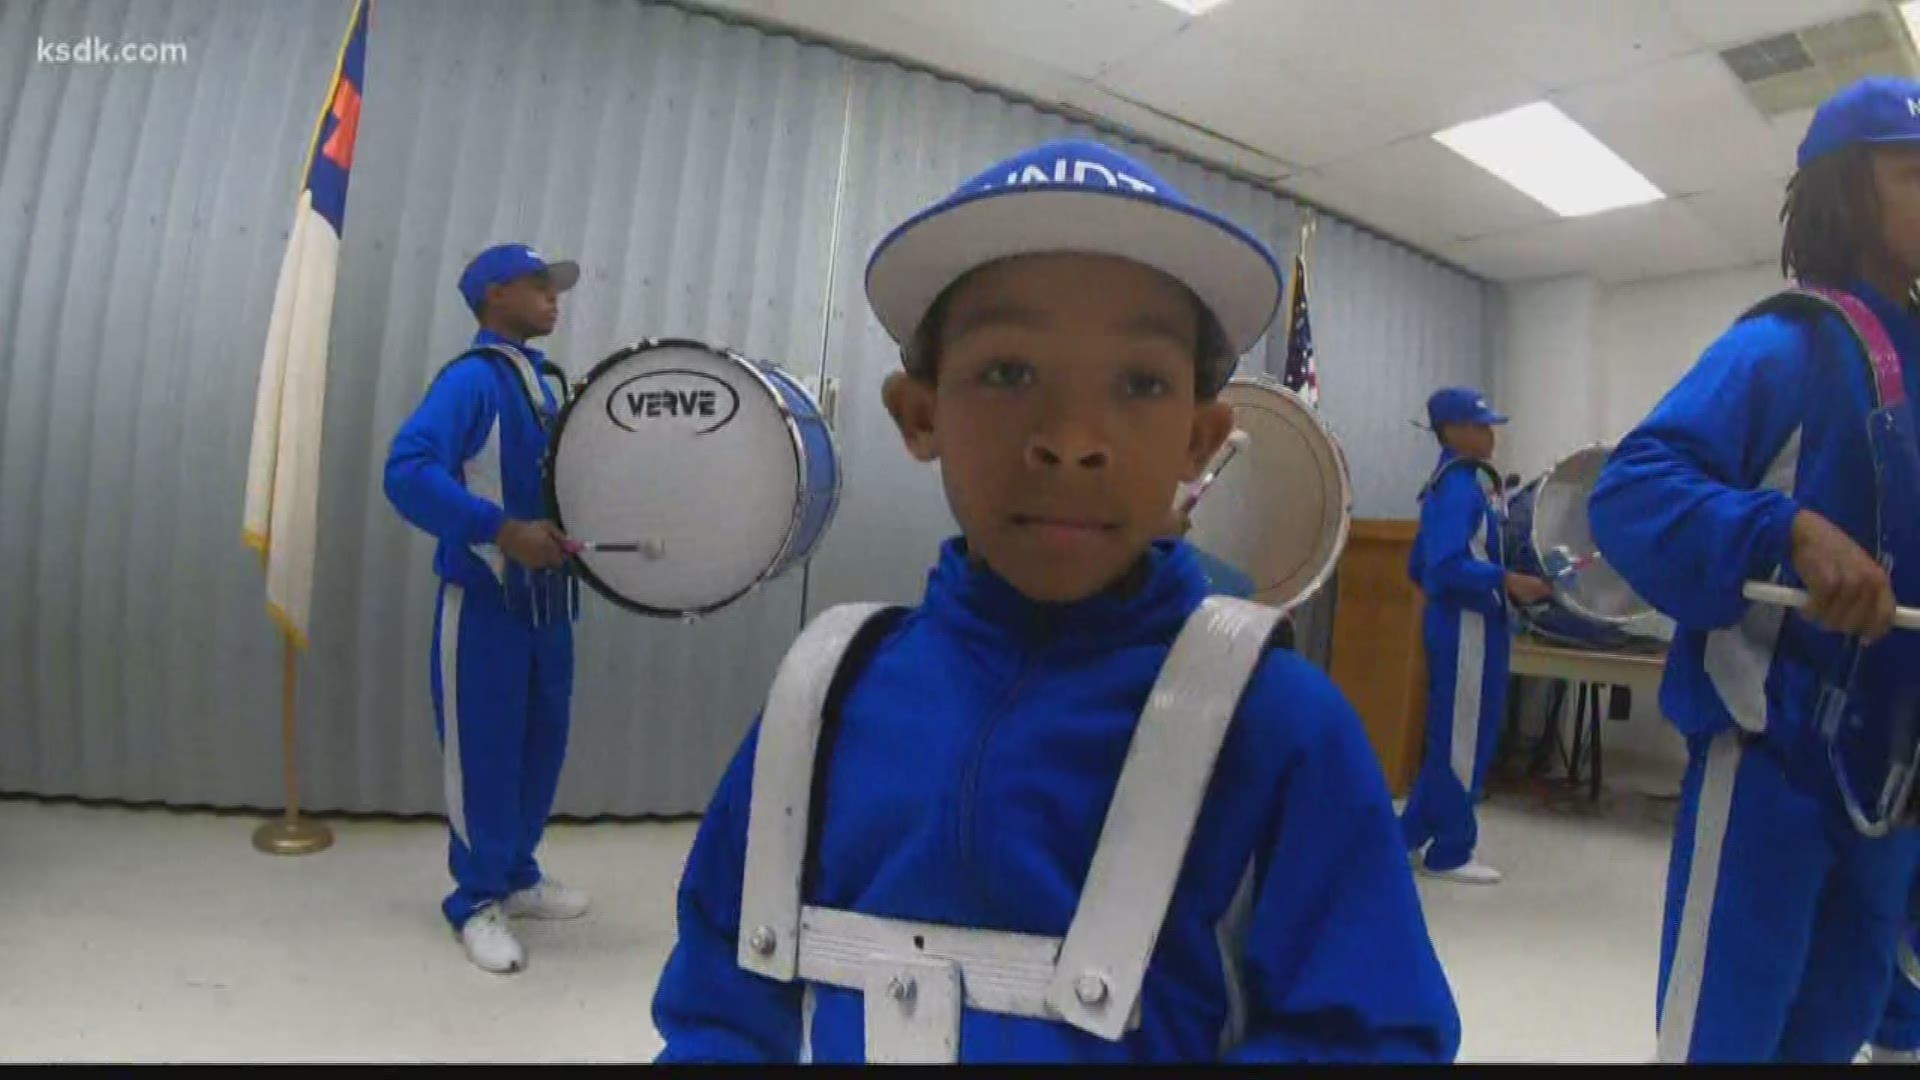 The Spirits of New Northside Drumline Ministry has been helping set kids on the right path for more than 20 years. Now, they need some help of their own.